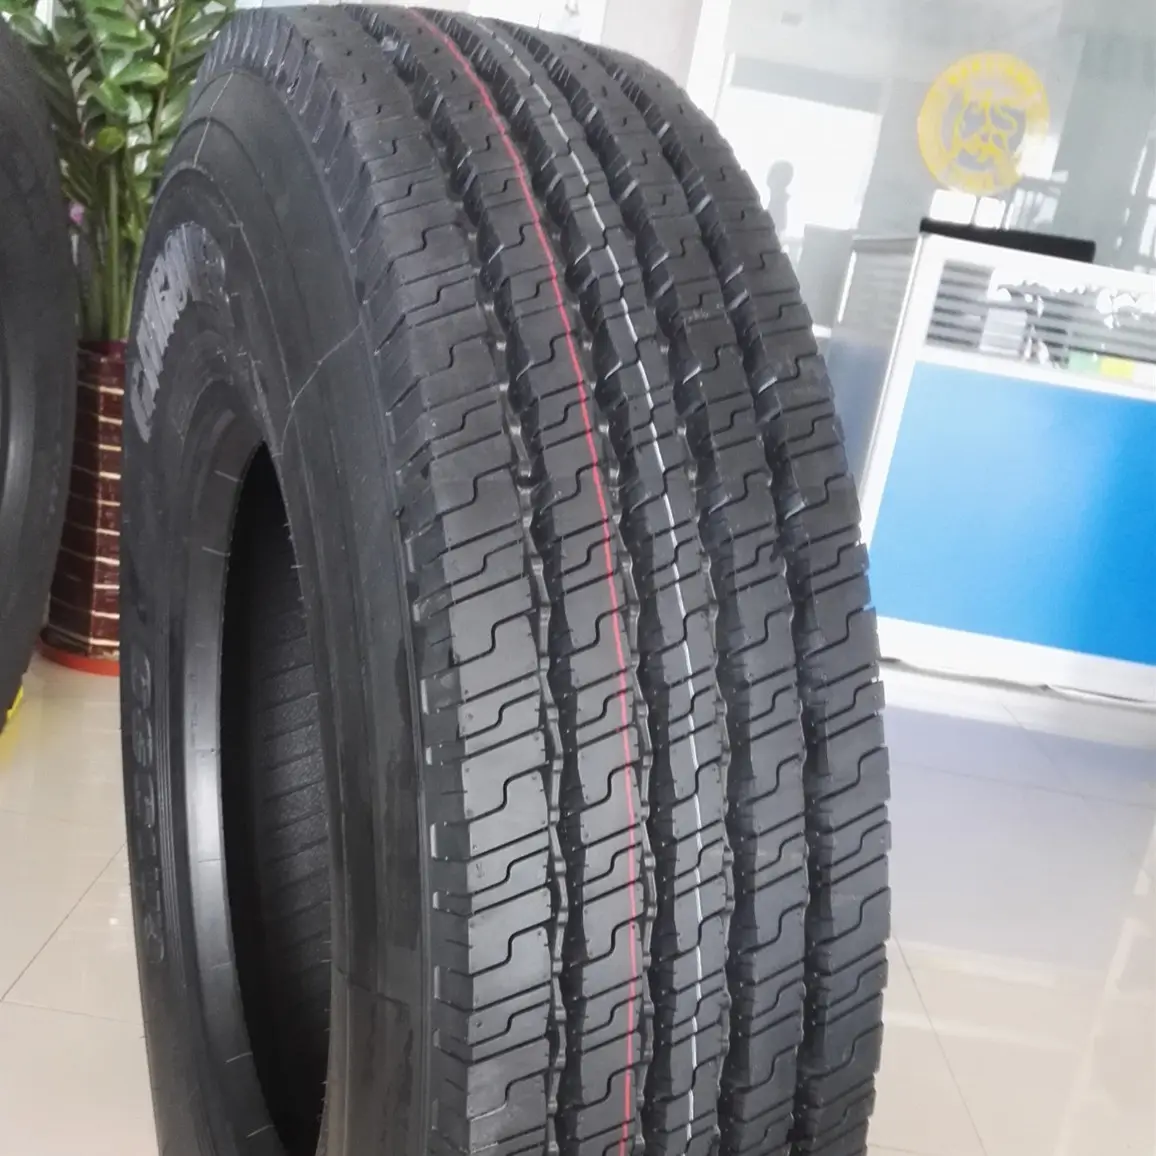 TRIANGLE BRAND TBR tyre all steel radial truck tyre 295/80 r22.5